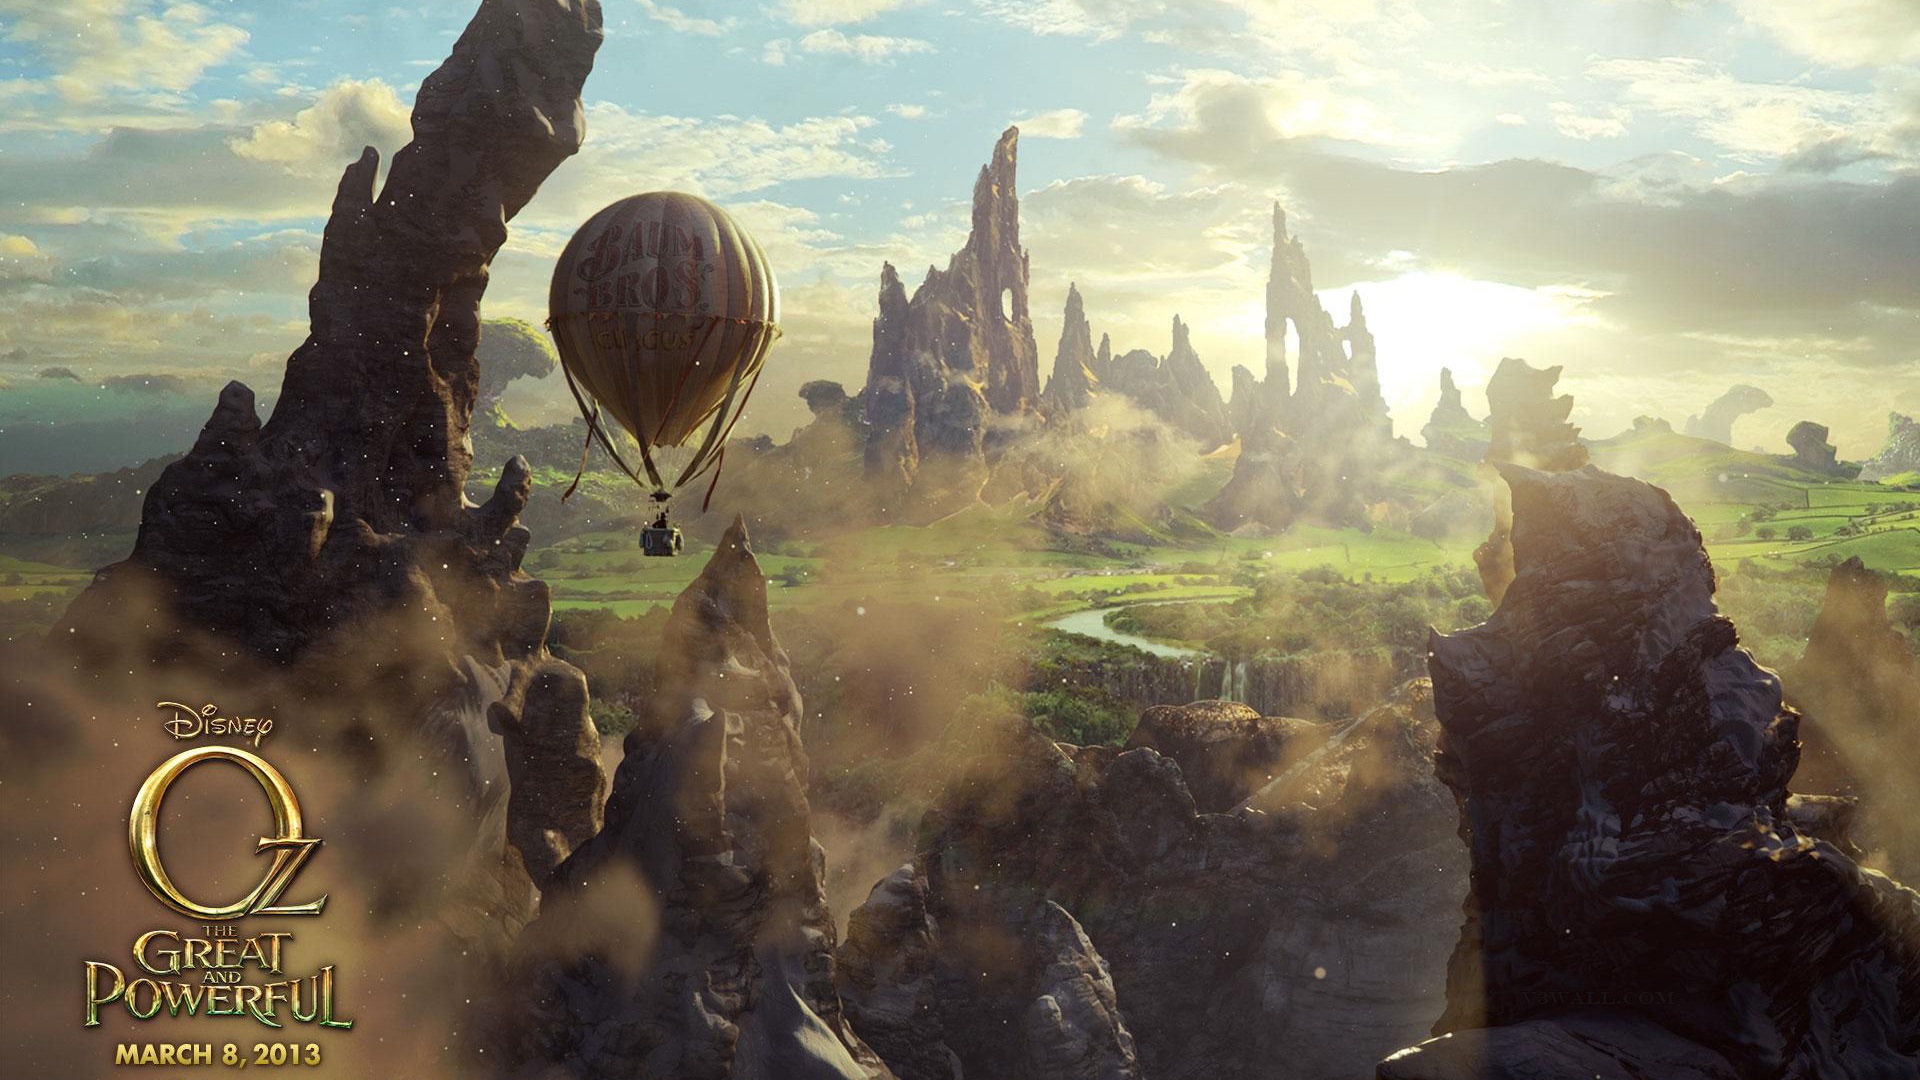 Oz The Great and Powerful 2013 HD wallpapers #9 - 1920x1080